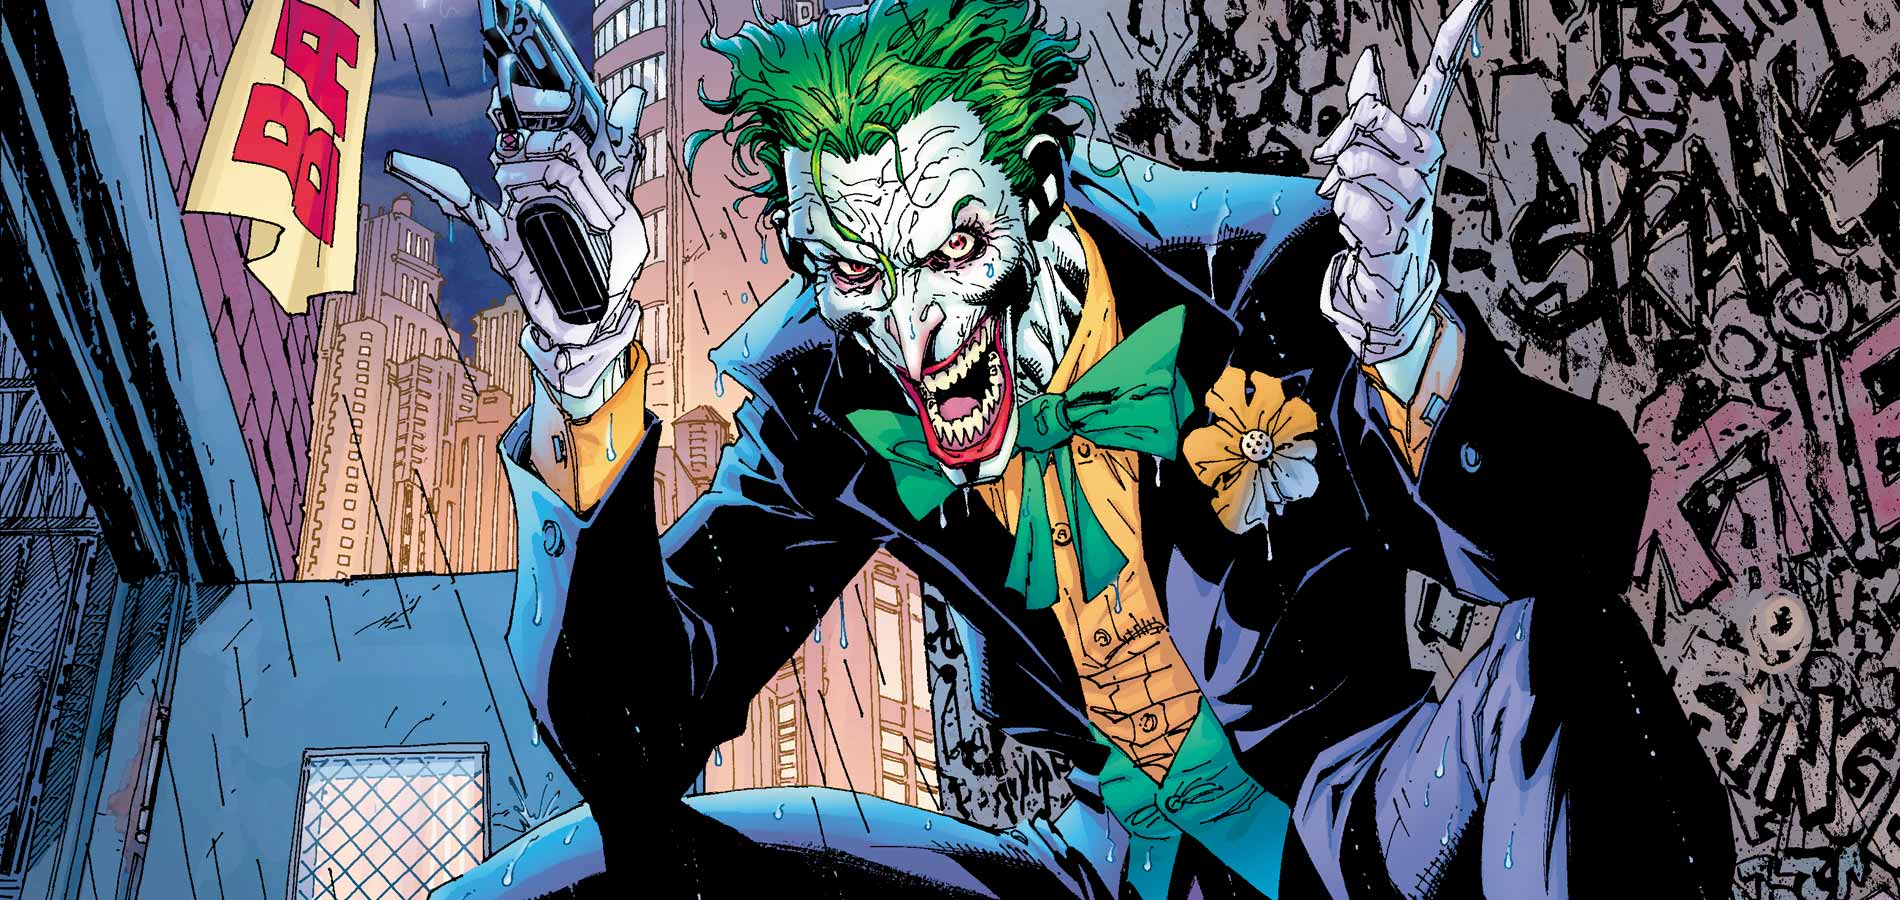 Confirmed Epic Podcast #74.1: Is Leo the next Joker?